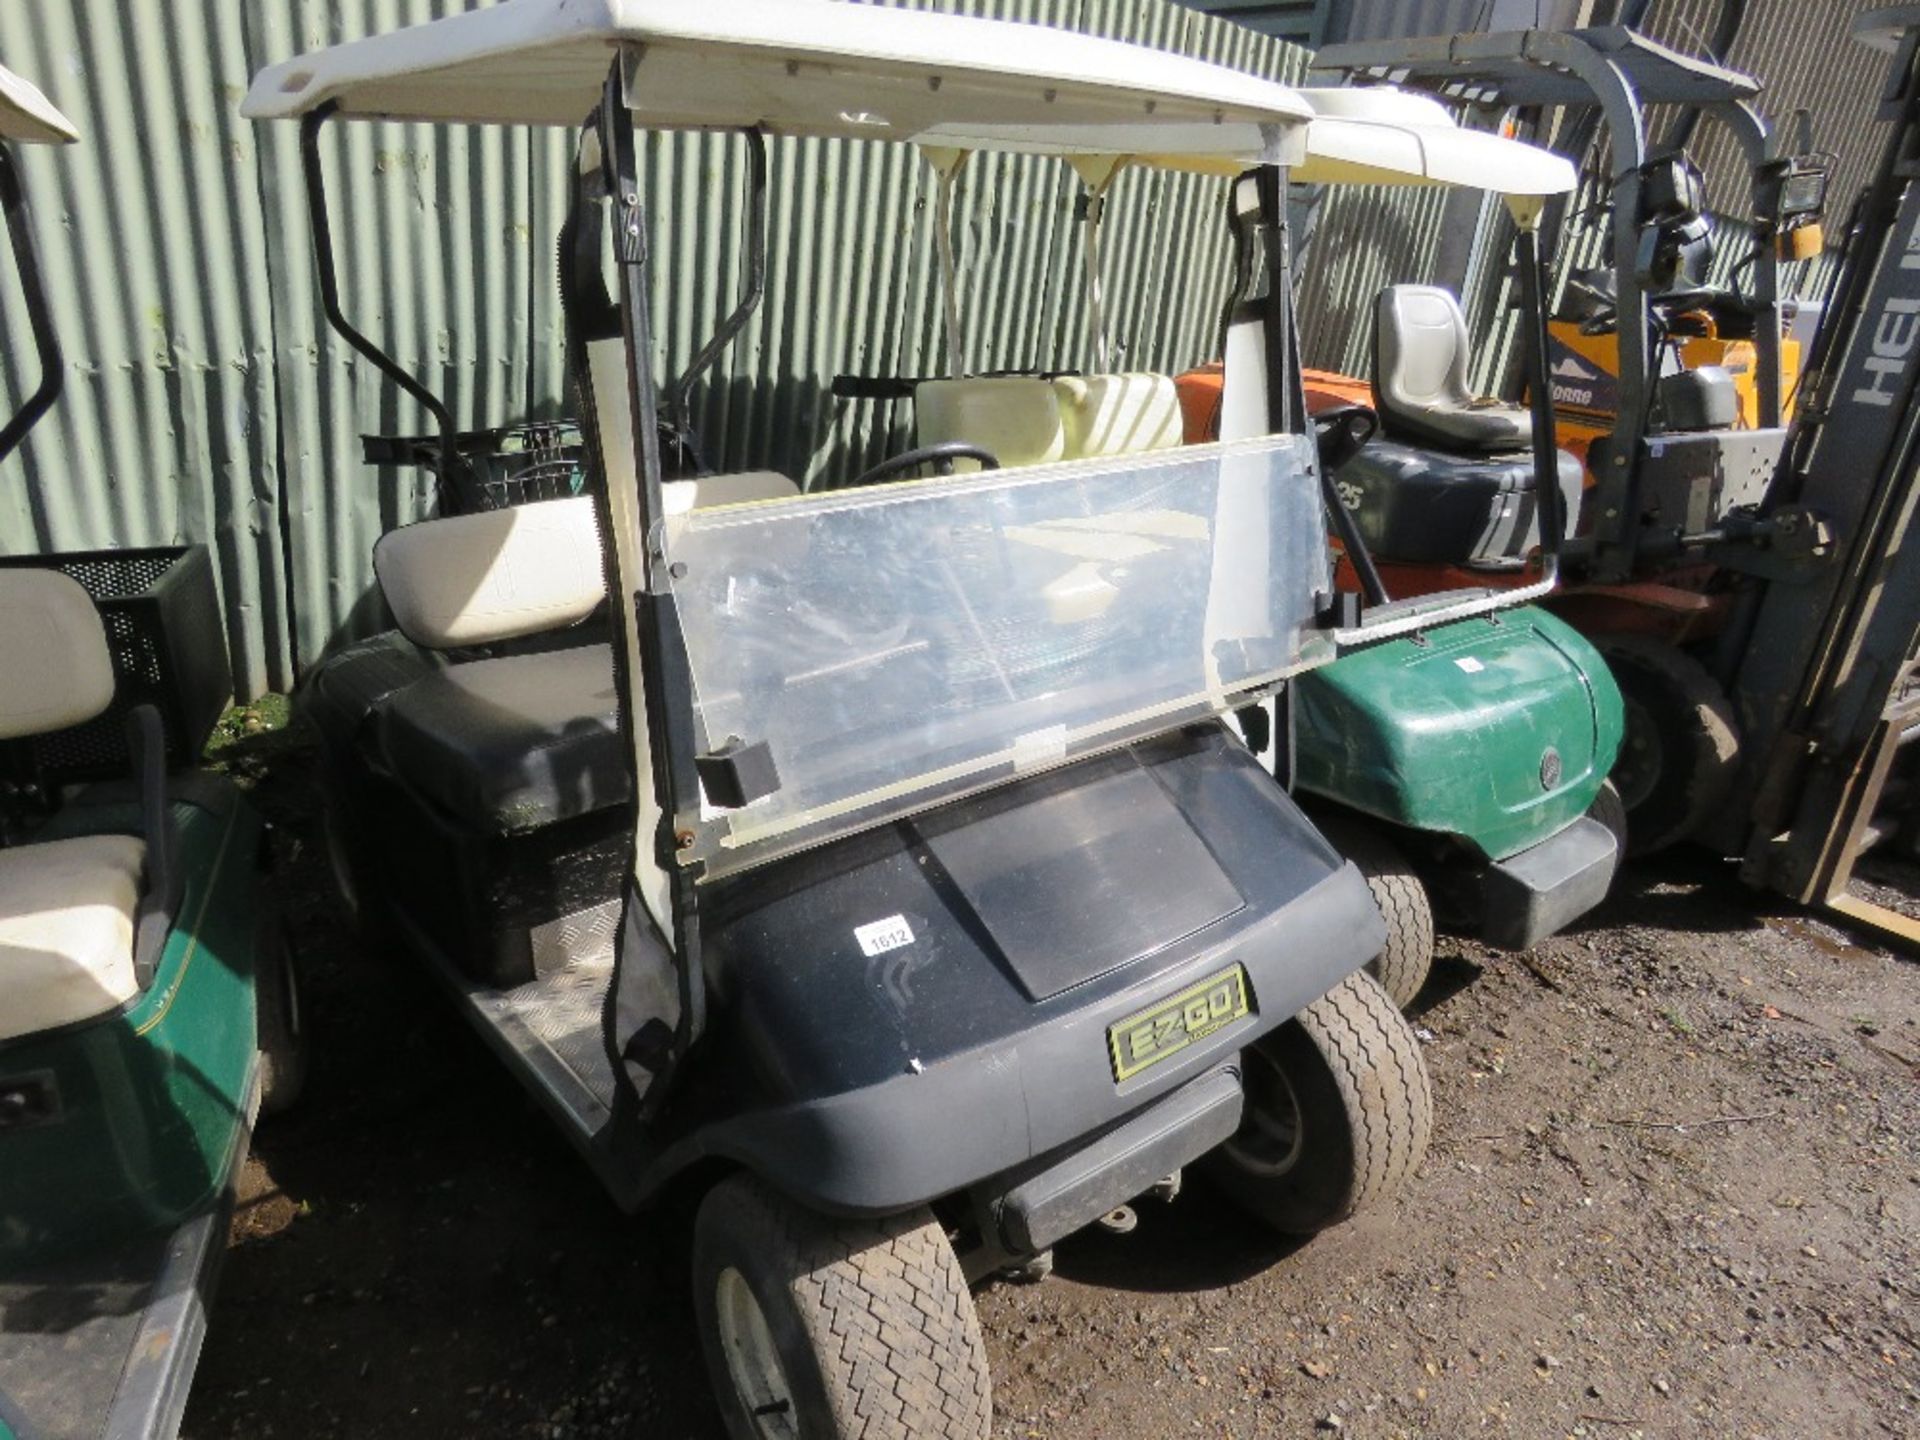 EZGO PETROL ENGINED GOLF BUGGY. BLACK COLOURED. WHEN TESTED WAS SEEN TO RUN, DRIVE, STEER AND BRAKE.